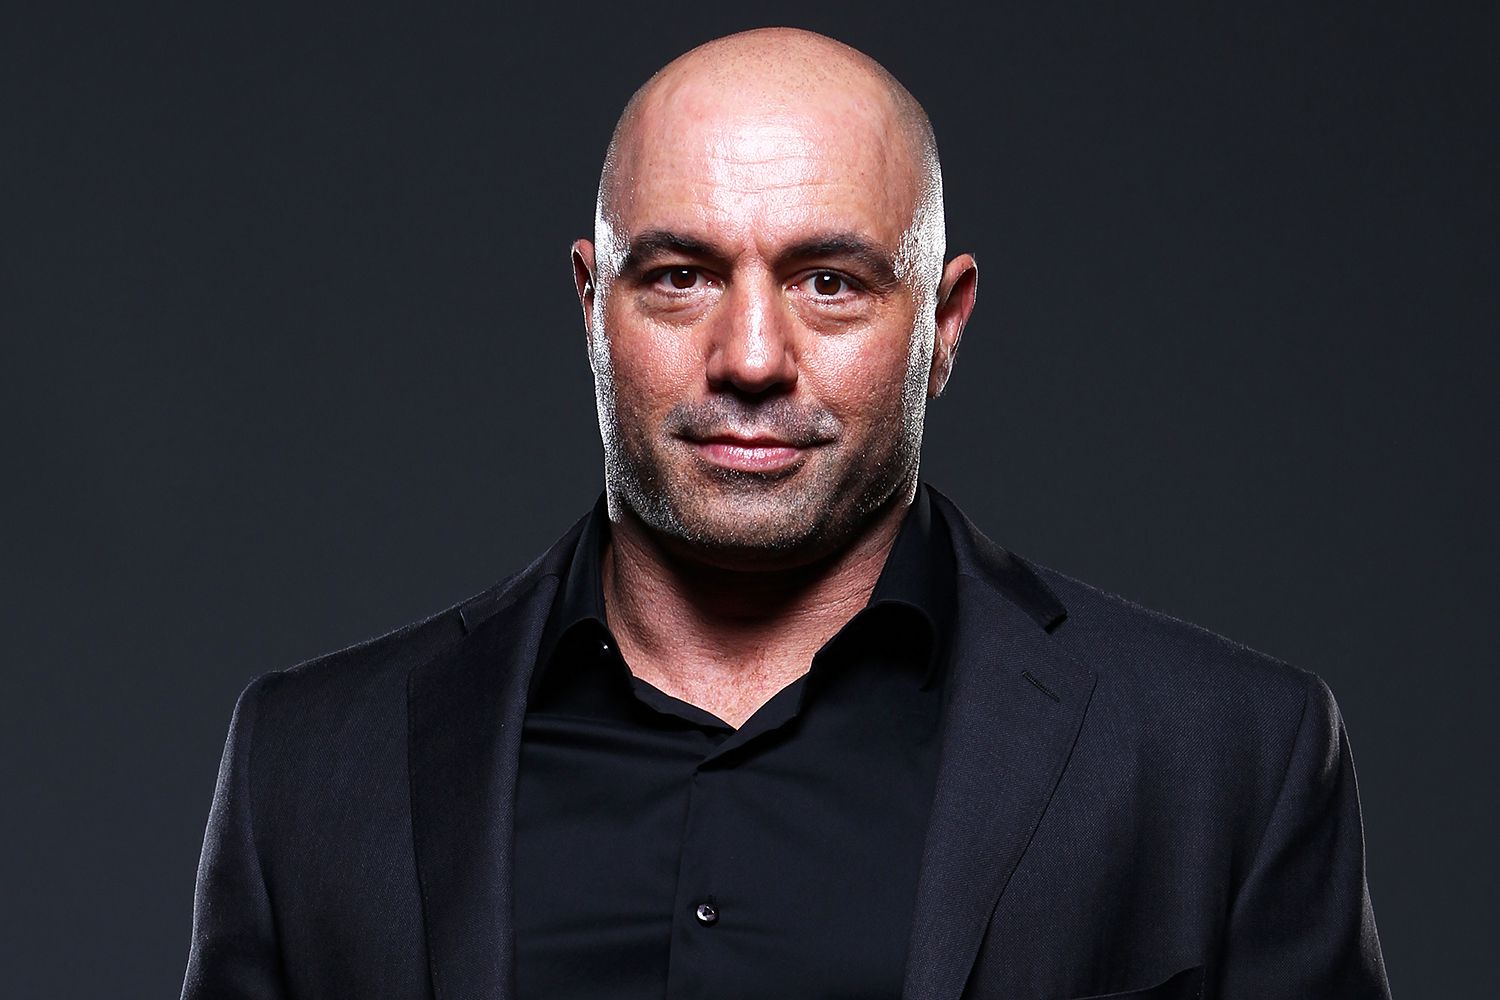 Joe Rogan Apologizes for Using N-Word Repeatedly in Past Podcast Episodes | PEOPLE.com